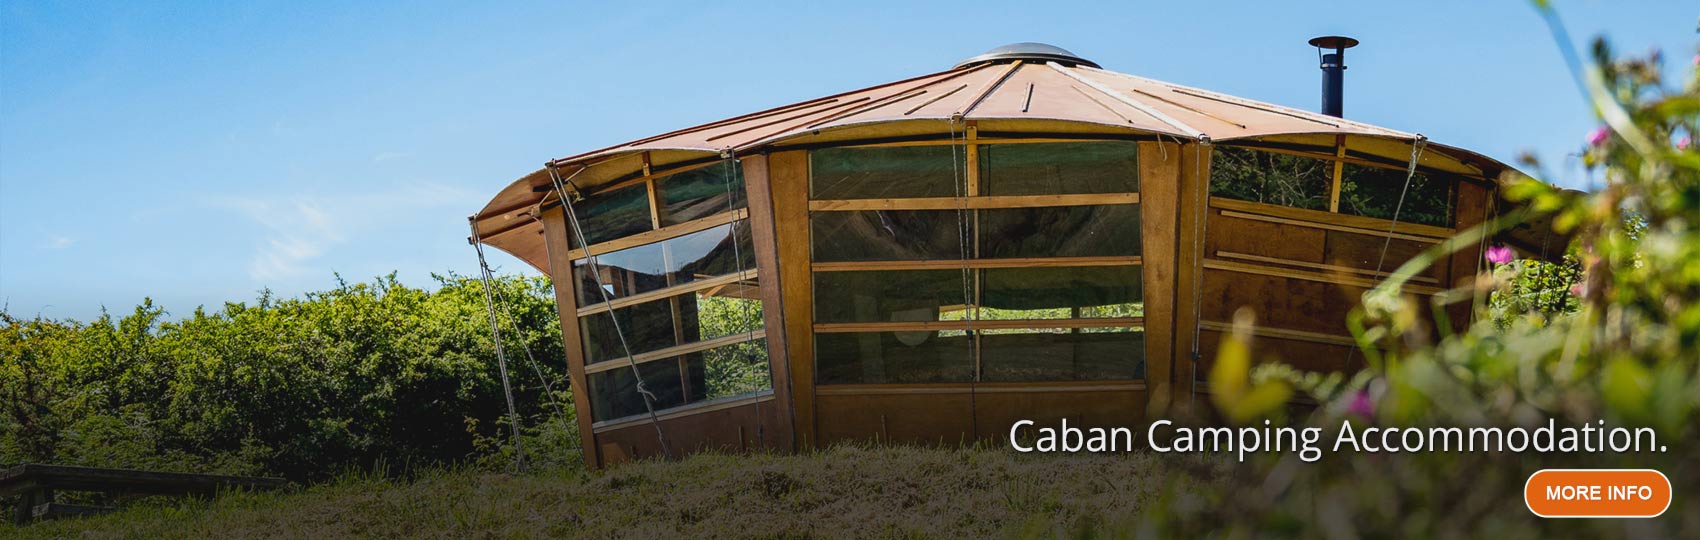 Caban camping hut with large observation windows